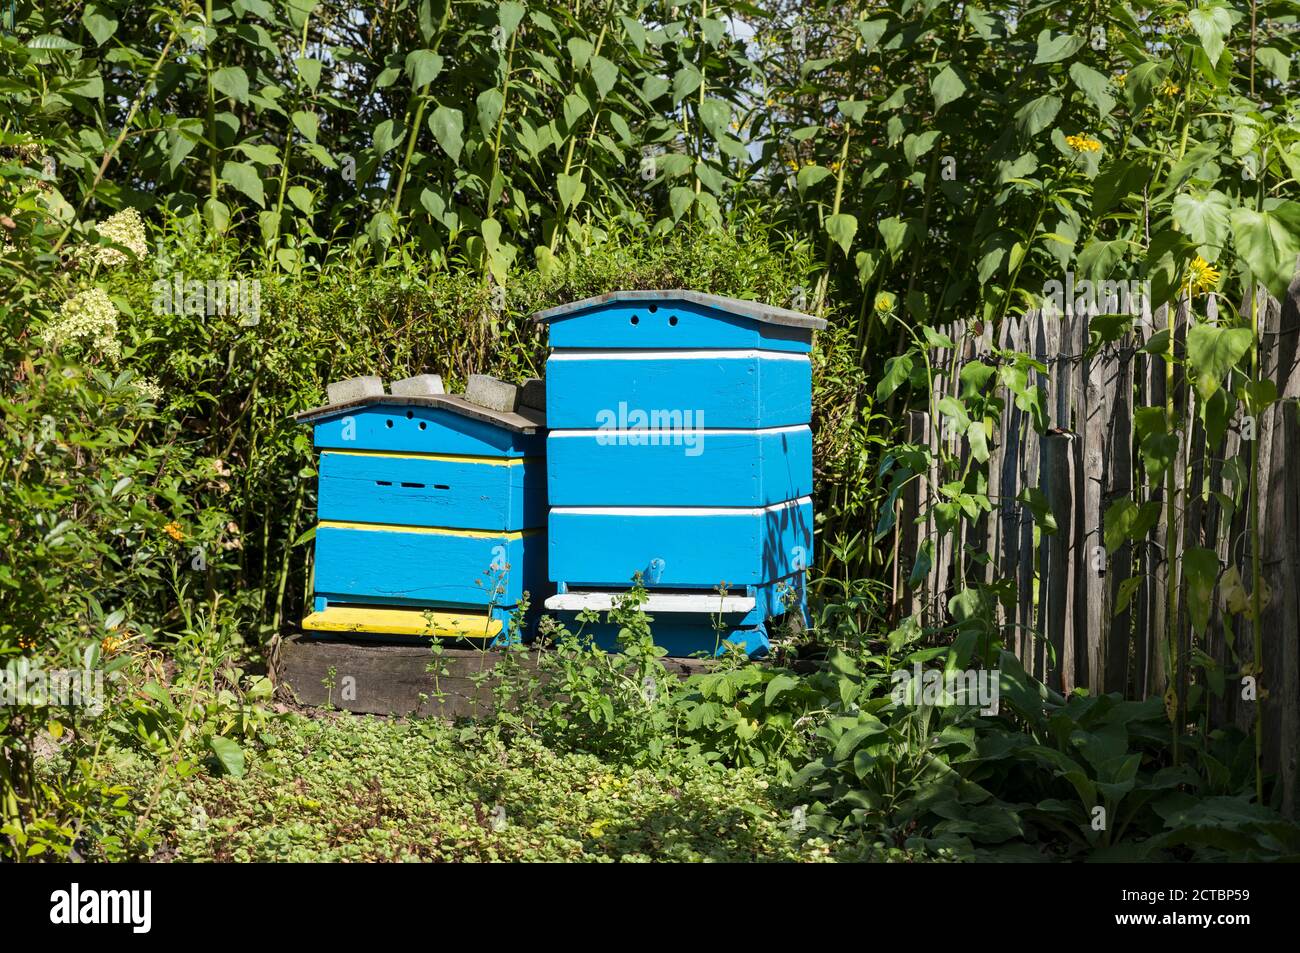 Traditional wooden hives for beeholding in a garden with plants and flowers special for the bees and insects Stock Photo